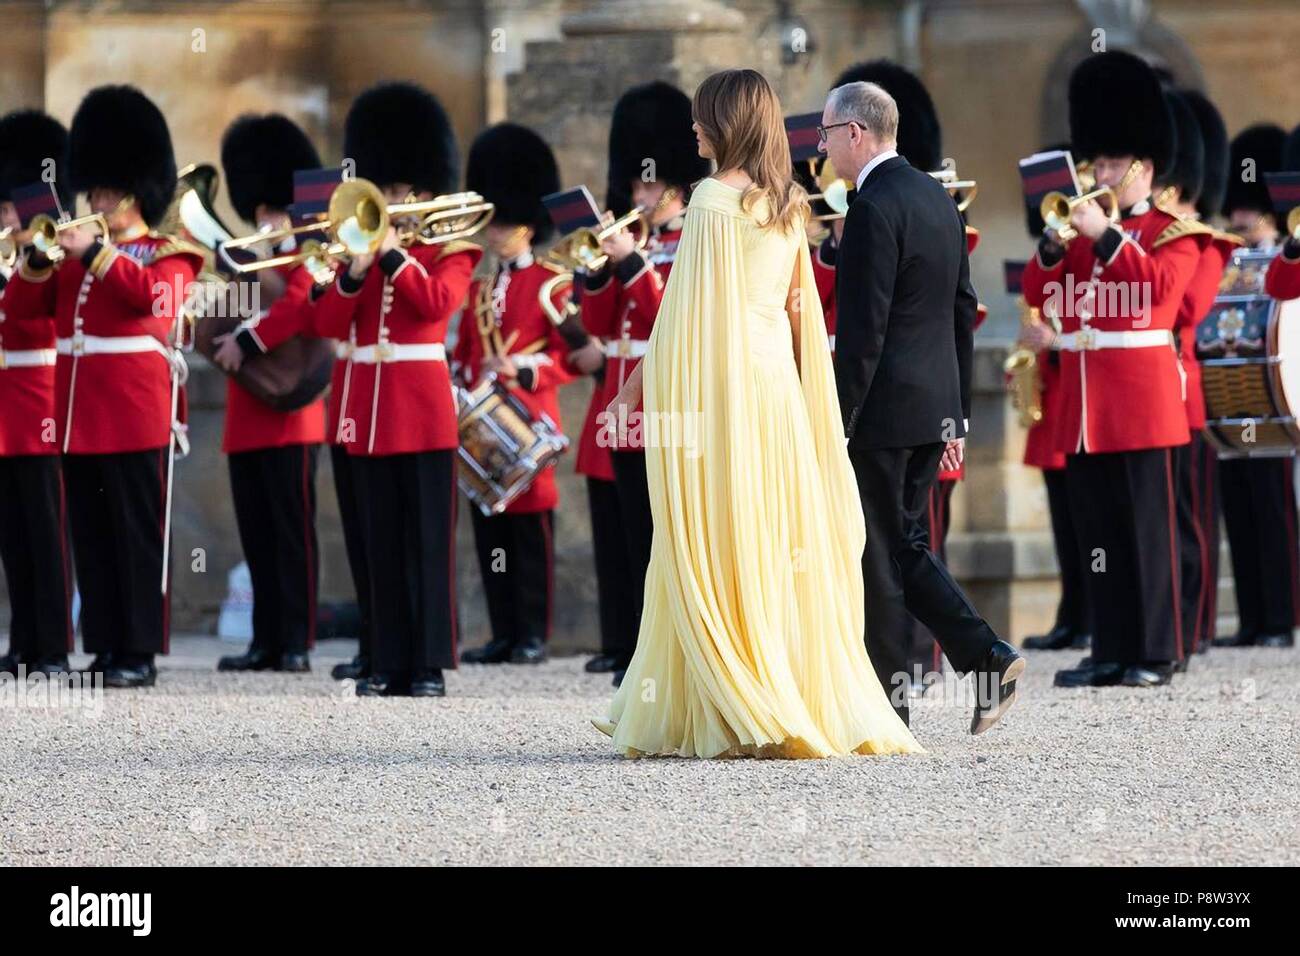 London, UK, 13 July 2018. U.S First Lady Melania Trump is escorted by Philip May, husband of British Prime Minister Theresa May during the arrival for dinner at Blenheim Palace July 12, 2018 in Oxfordshire, England. Credit: Planetpix/Alamy Live News Stock Photo